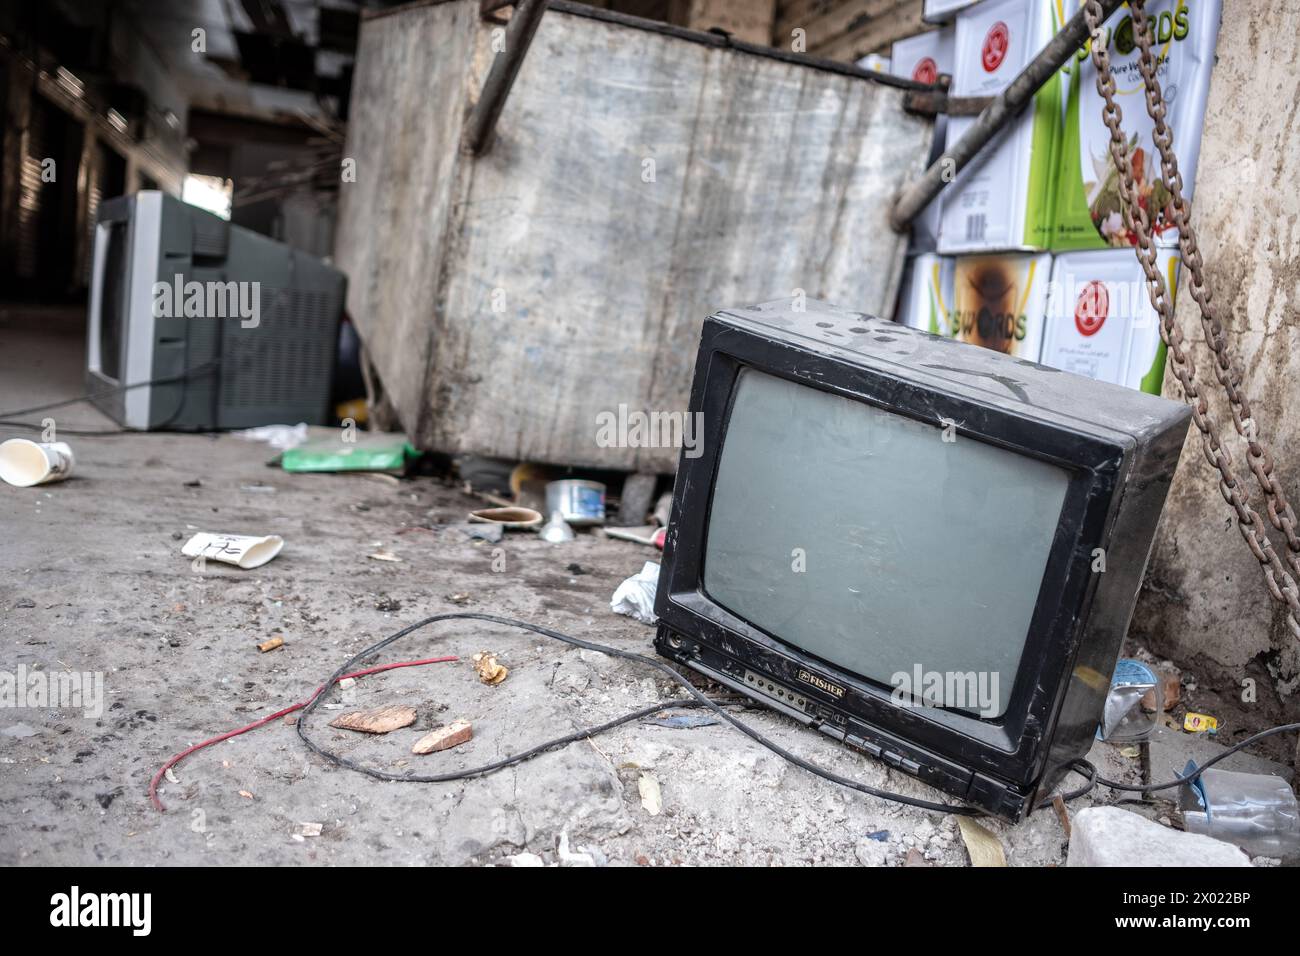 MUHARRAQ, BAHRAIN - FEBRUARY 10, 2018: Defunct cathode ray tube television sets sit abandoned on a concrete floor by a dumpster with other trash. Stock Photo